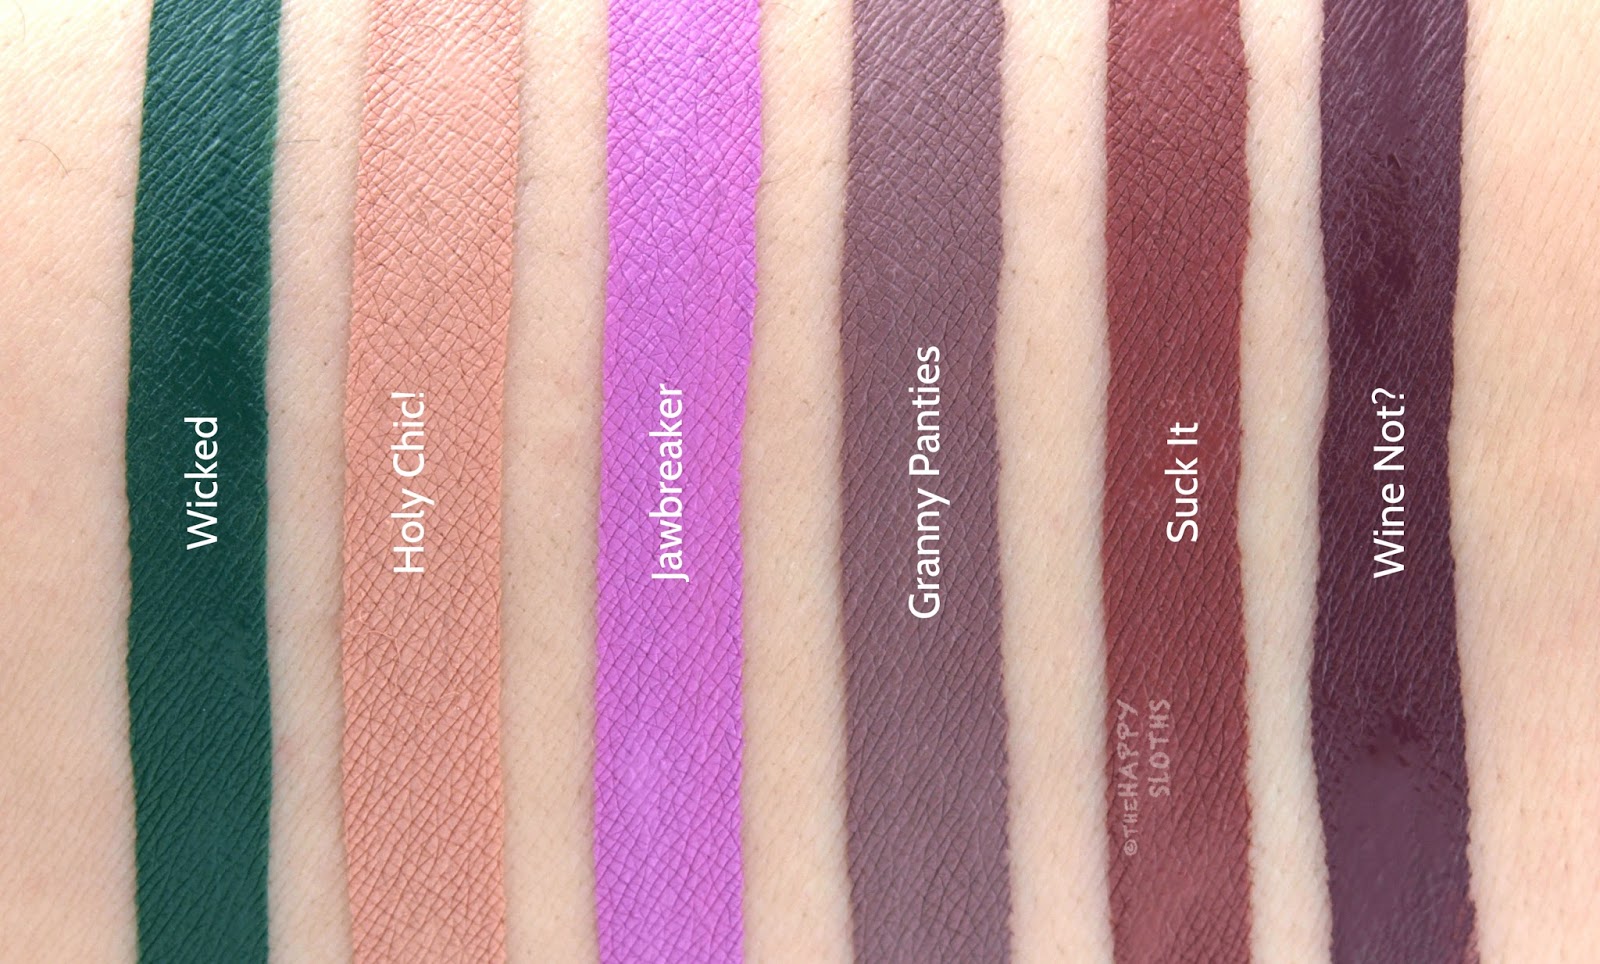 NEW SHADES, Too Faced Melted Matte Liquified Matte Long Wear Lipstick:  Review and Swatches